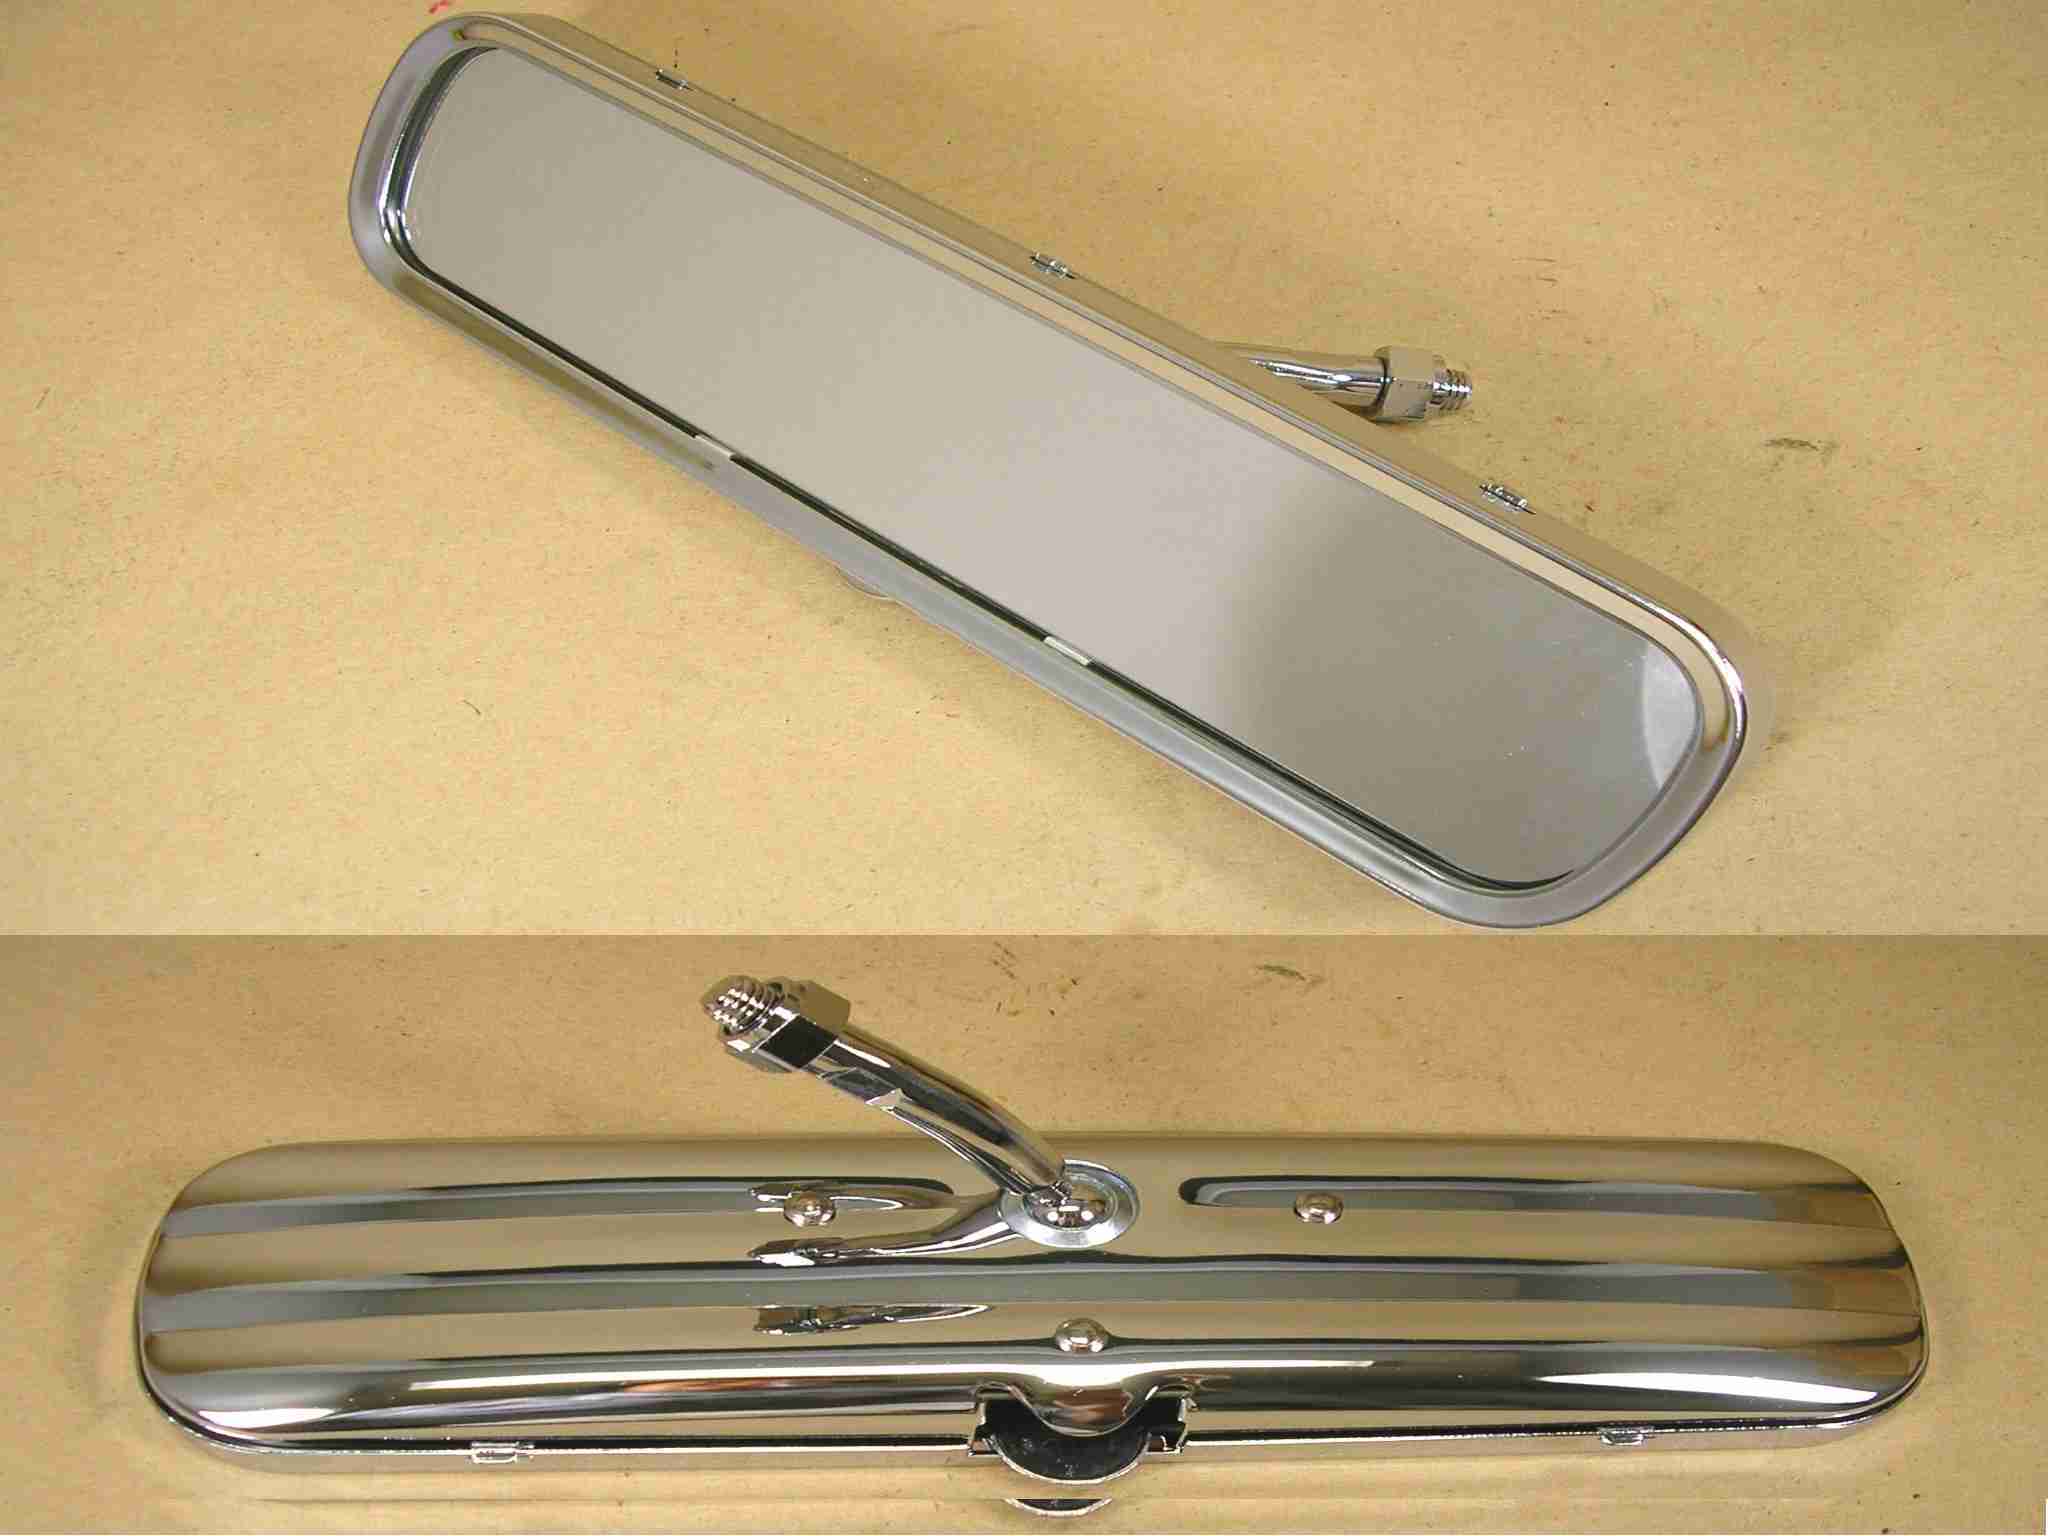 1951-52 Accessory Day/Night "Glare-Proof" Inside Rearview Mirror, w/ flip tab, 8-3/4"x2-3/8" w/ two incised lines & long bent arm